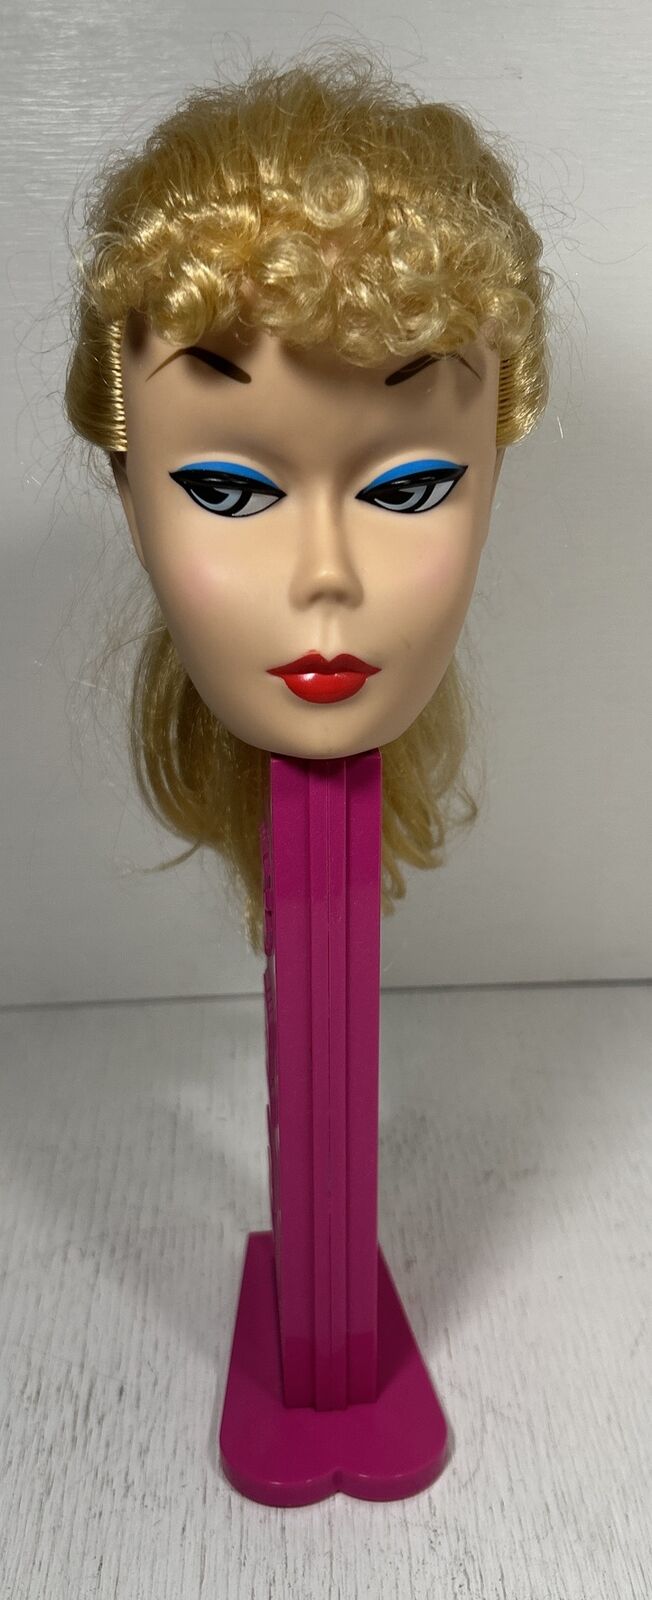 RARE Vintage Giant 13” Barbie PEZ Dispenser w/ Real Doll Hair Collectible